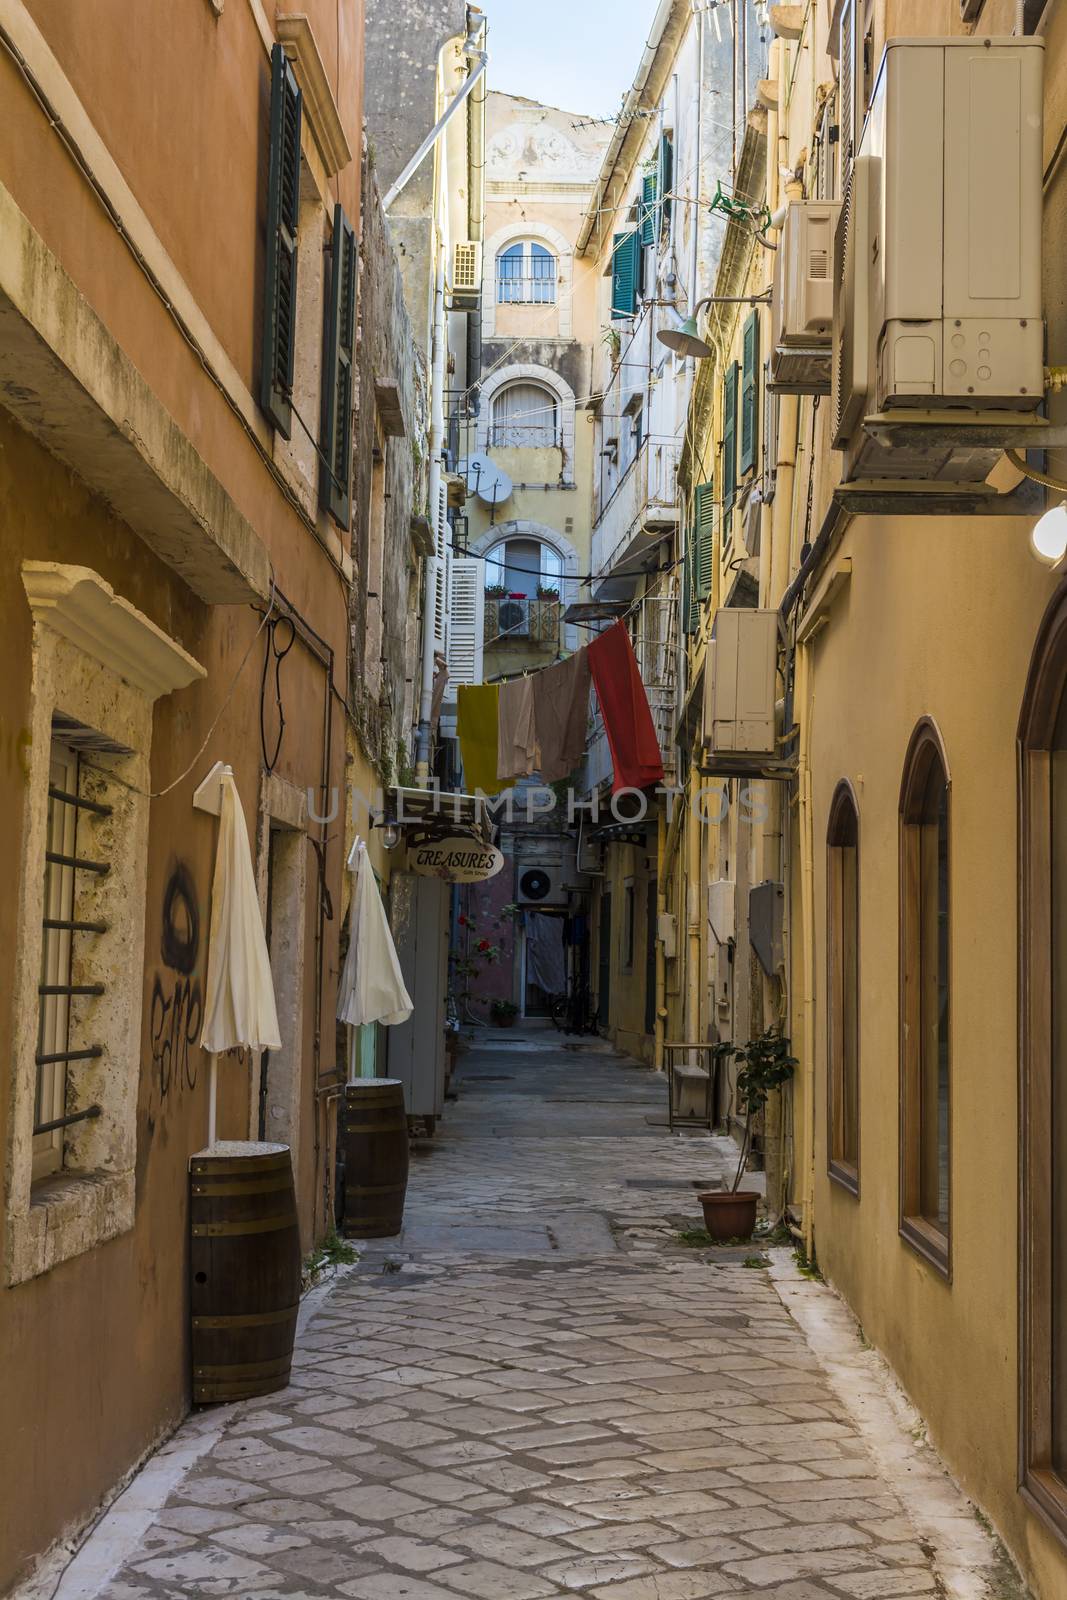 Alleyway in Corfu old town, Greece by ankarb